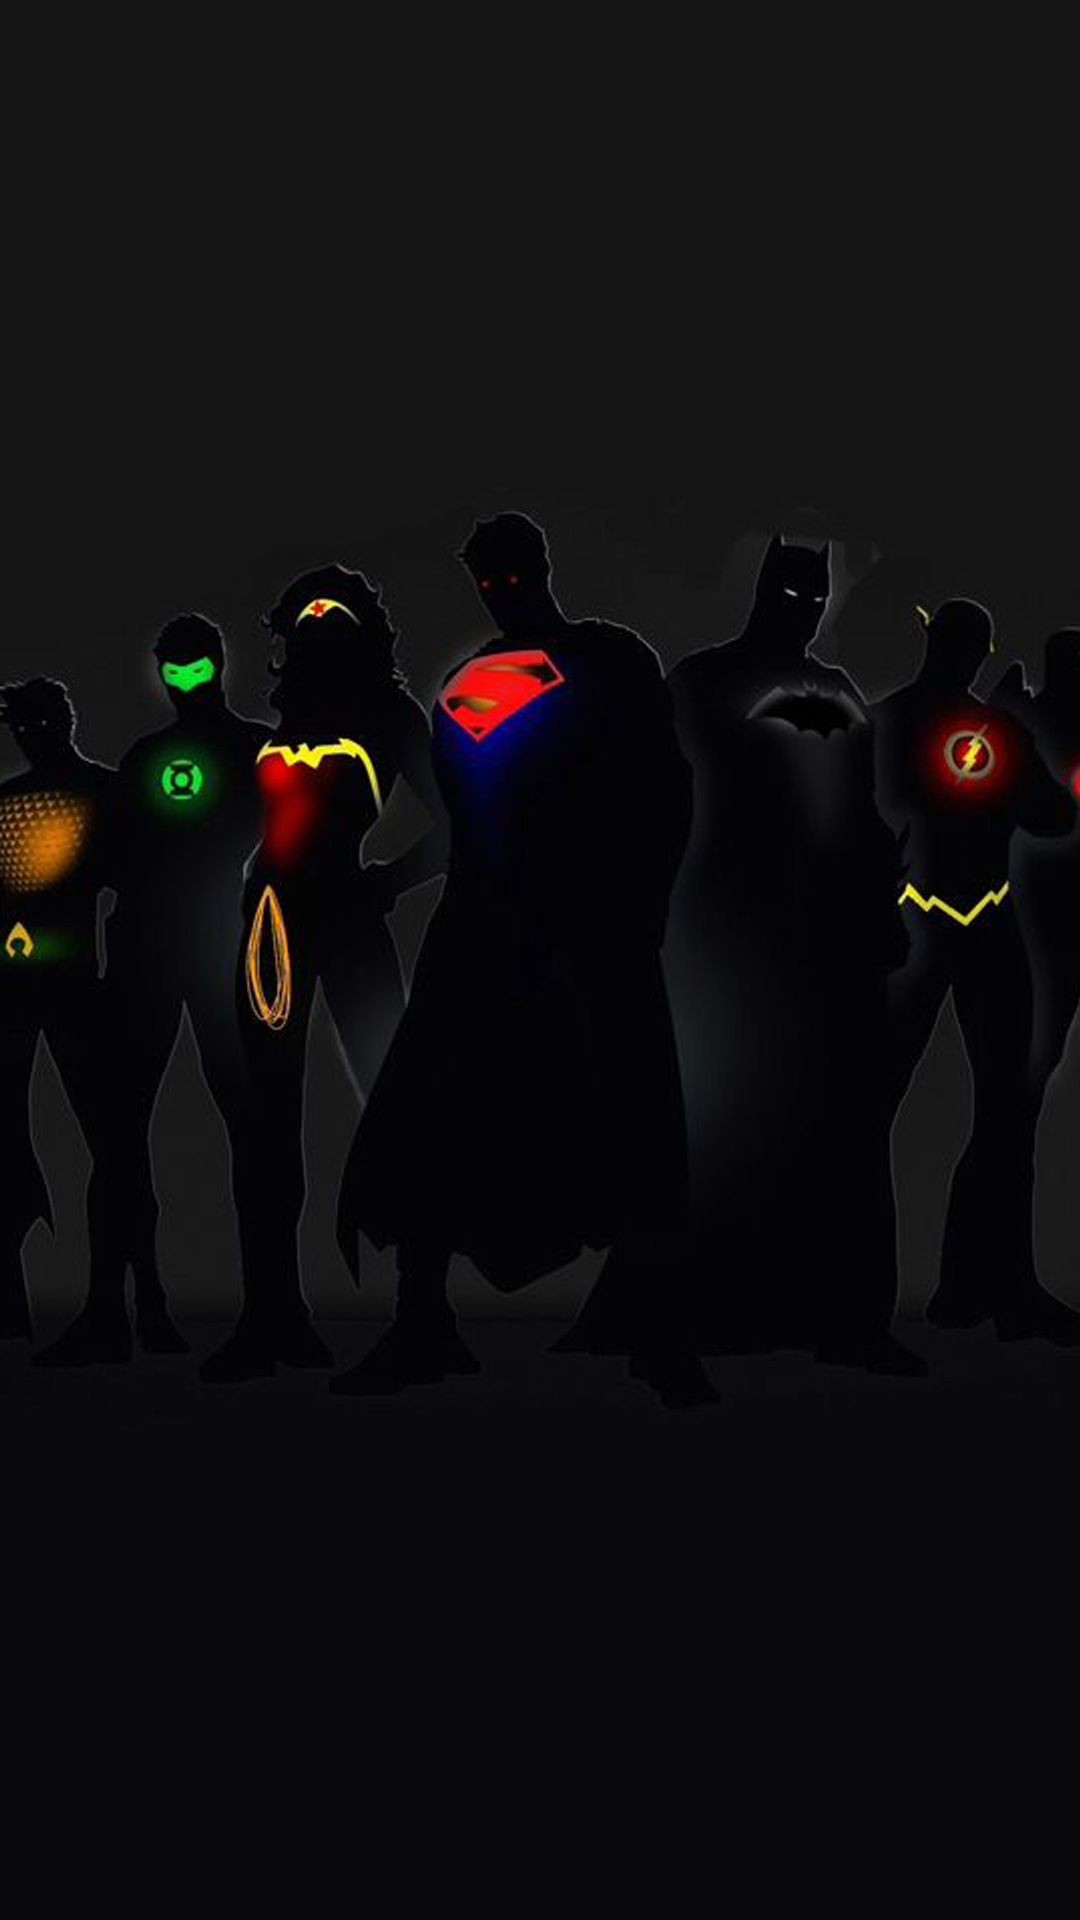 1080x1920 Image for justice league wallpaper iphone 6